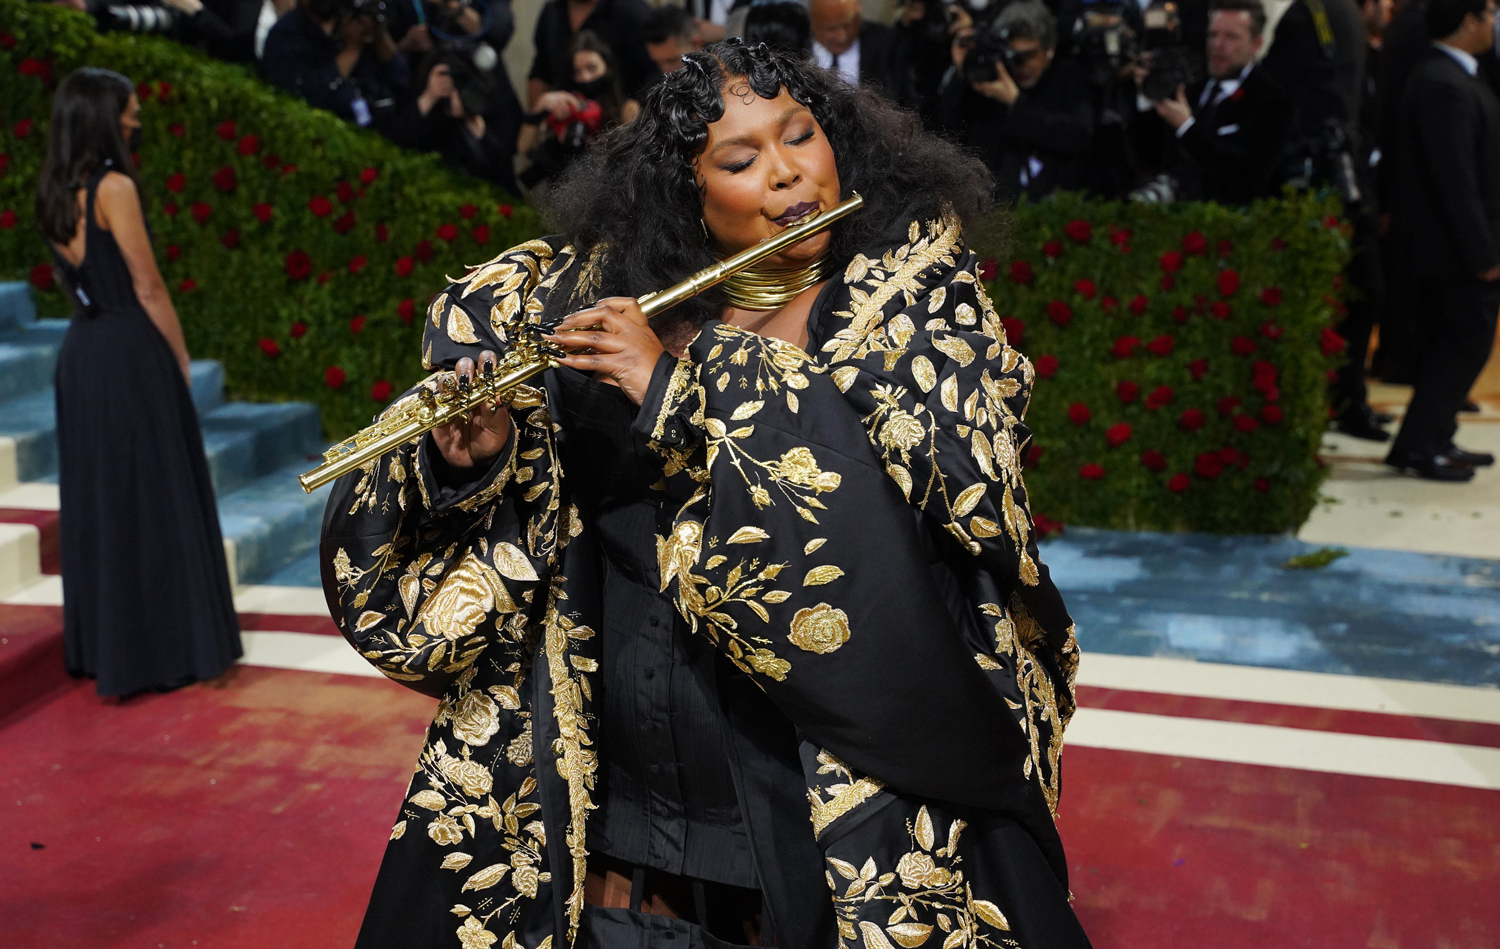 Lizzo is dressed in formal wear as she plays a flute on a red carpet in front of a crowd of photographers.